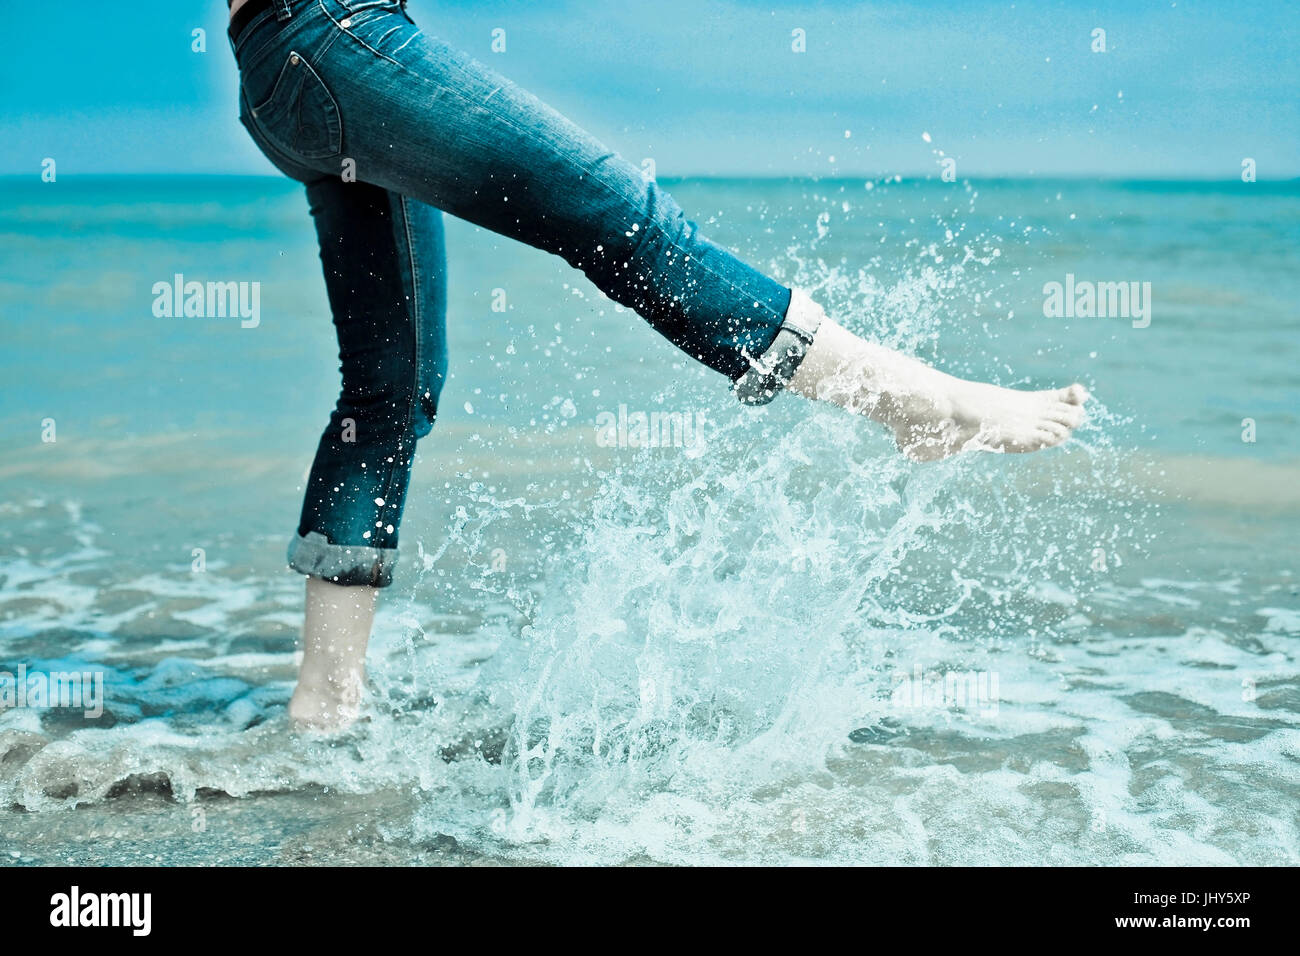 Young woman bathes her feet in the sea, Junge Frau badet ihre Fuesse im Meer Stock Photo